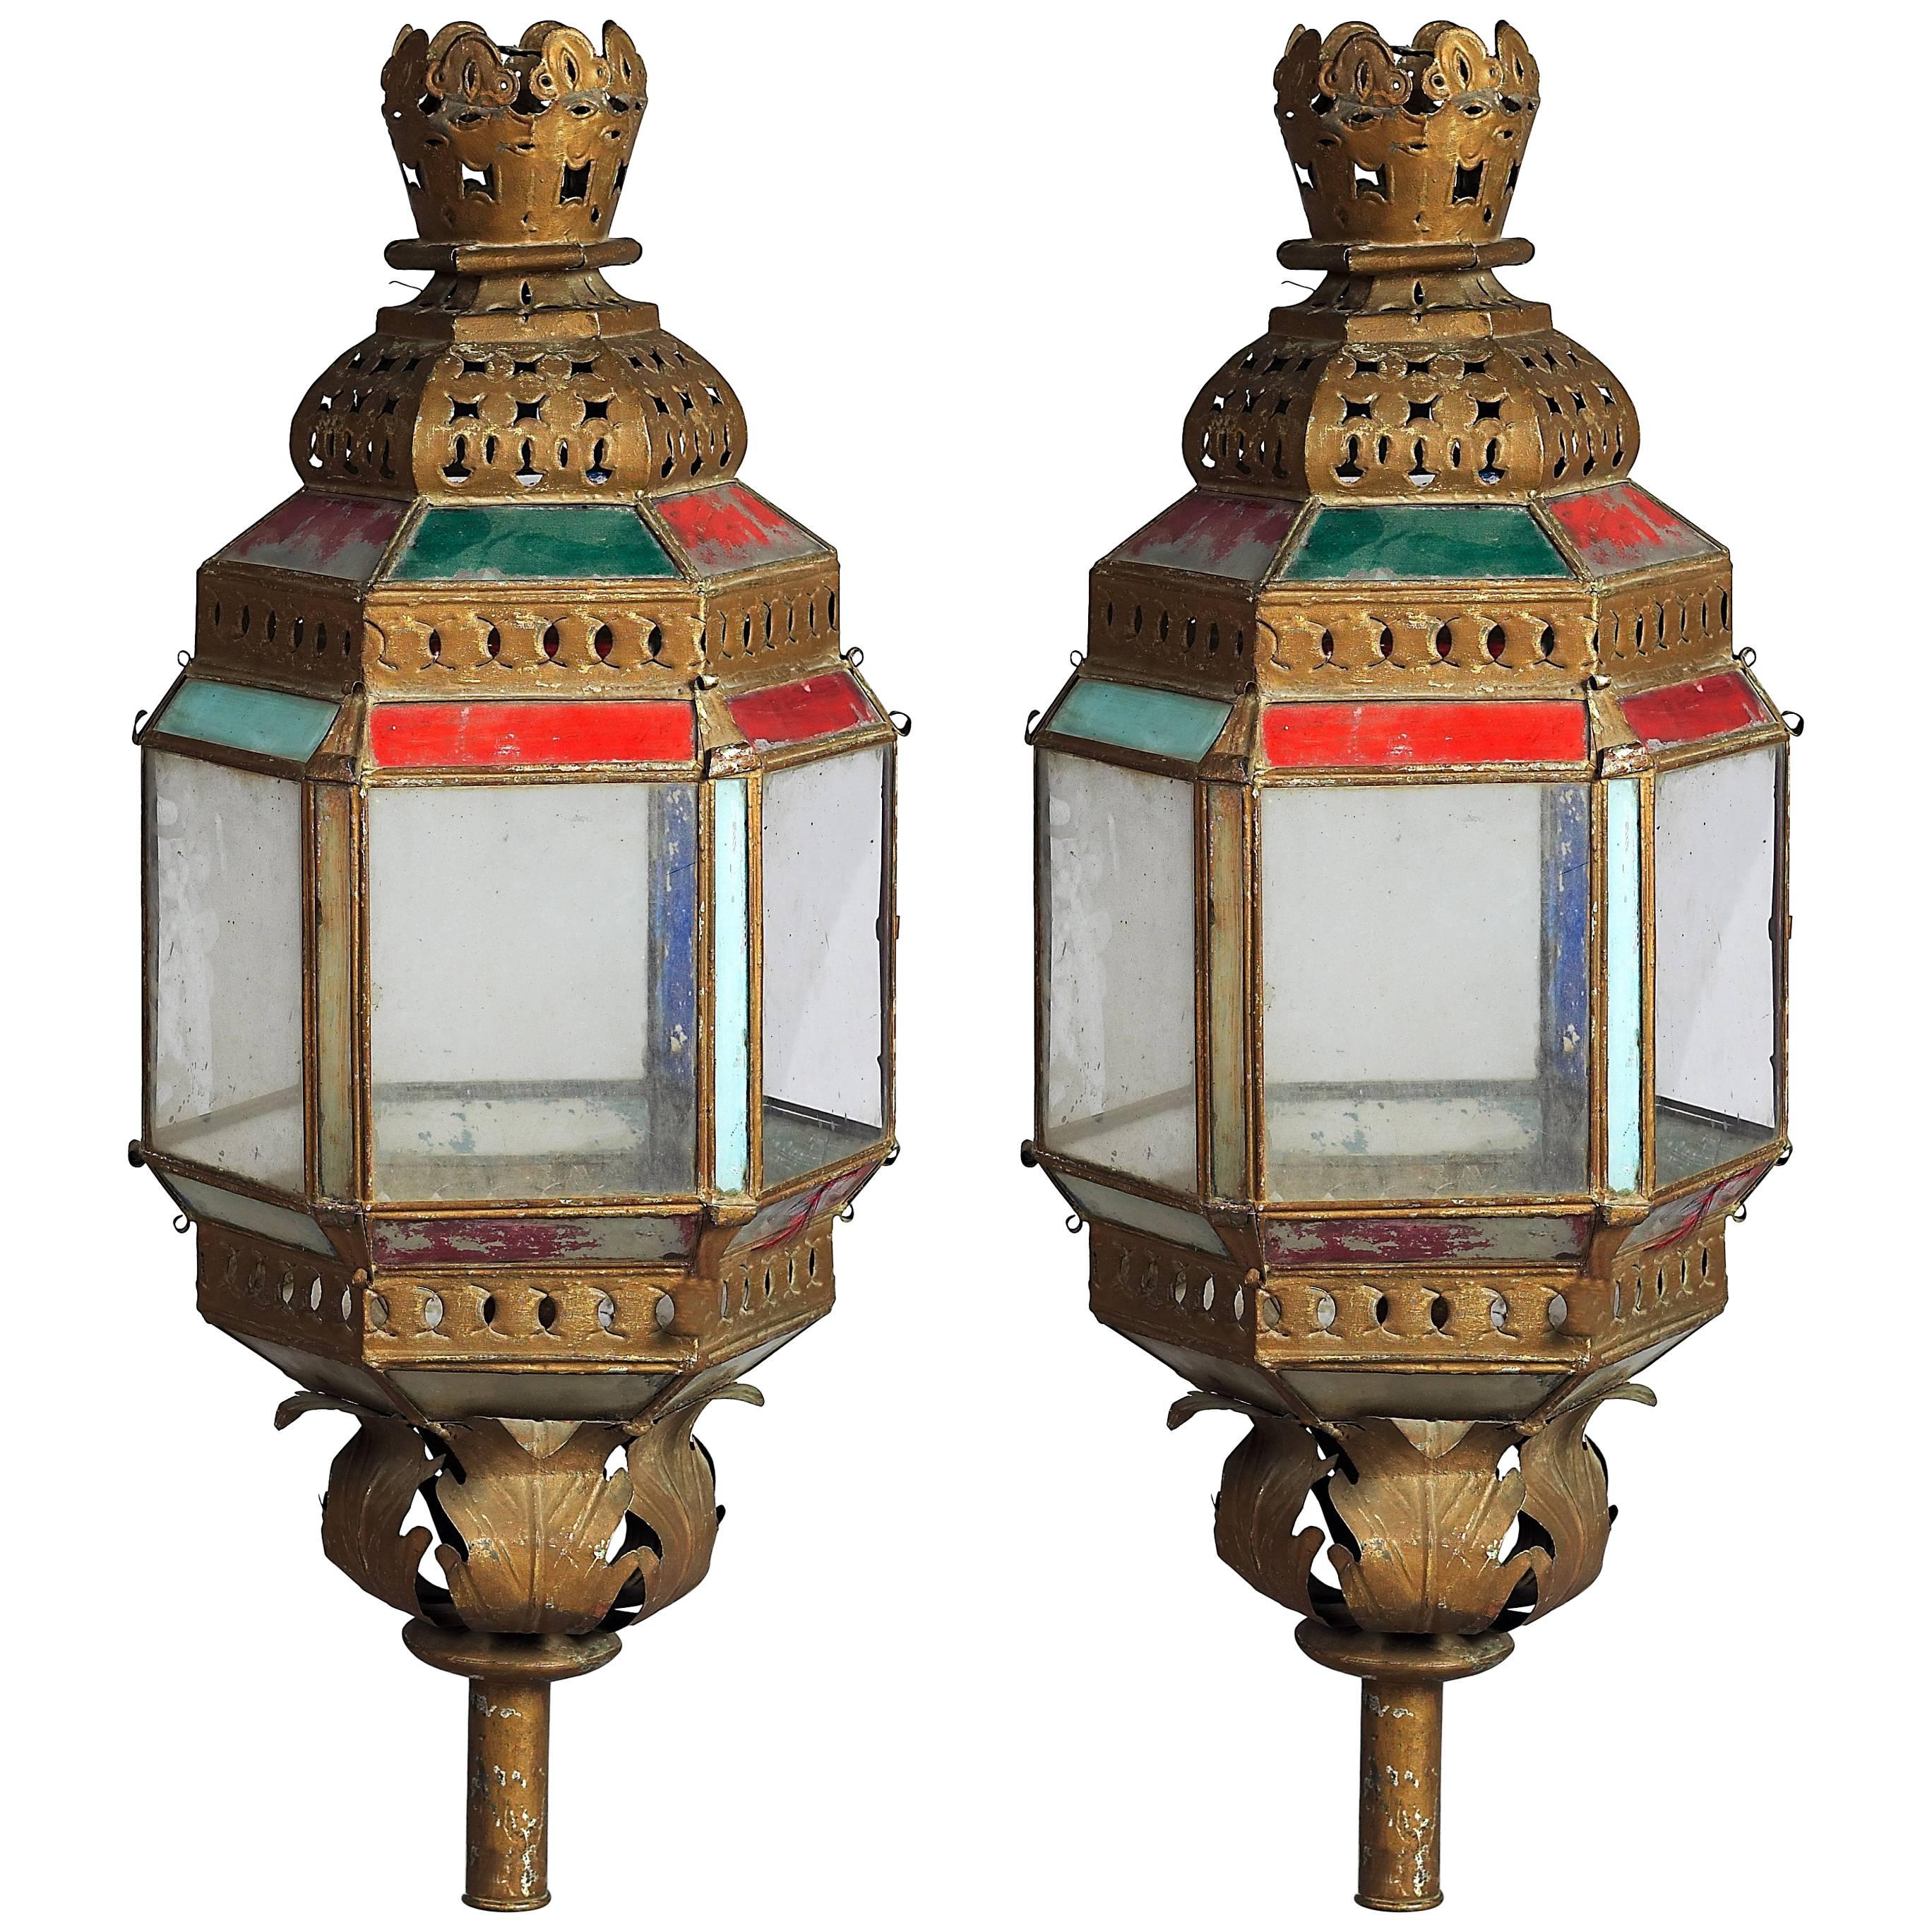 Pair of Important Venetian Six-Sided Lanterns, Italy, Late 18th Century For Sale